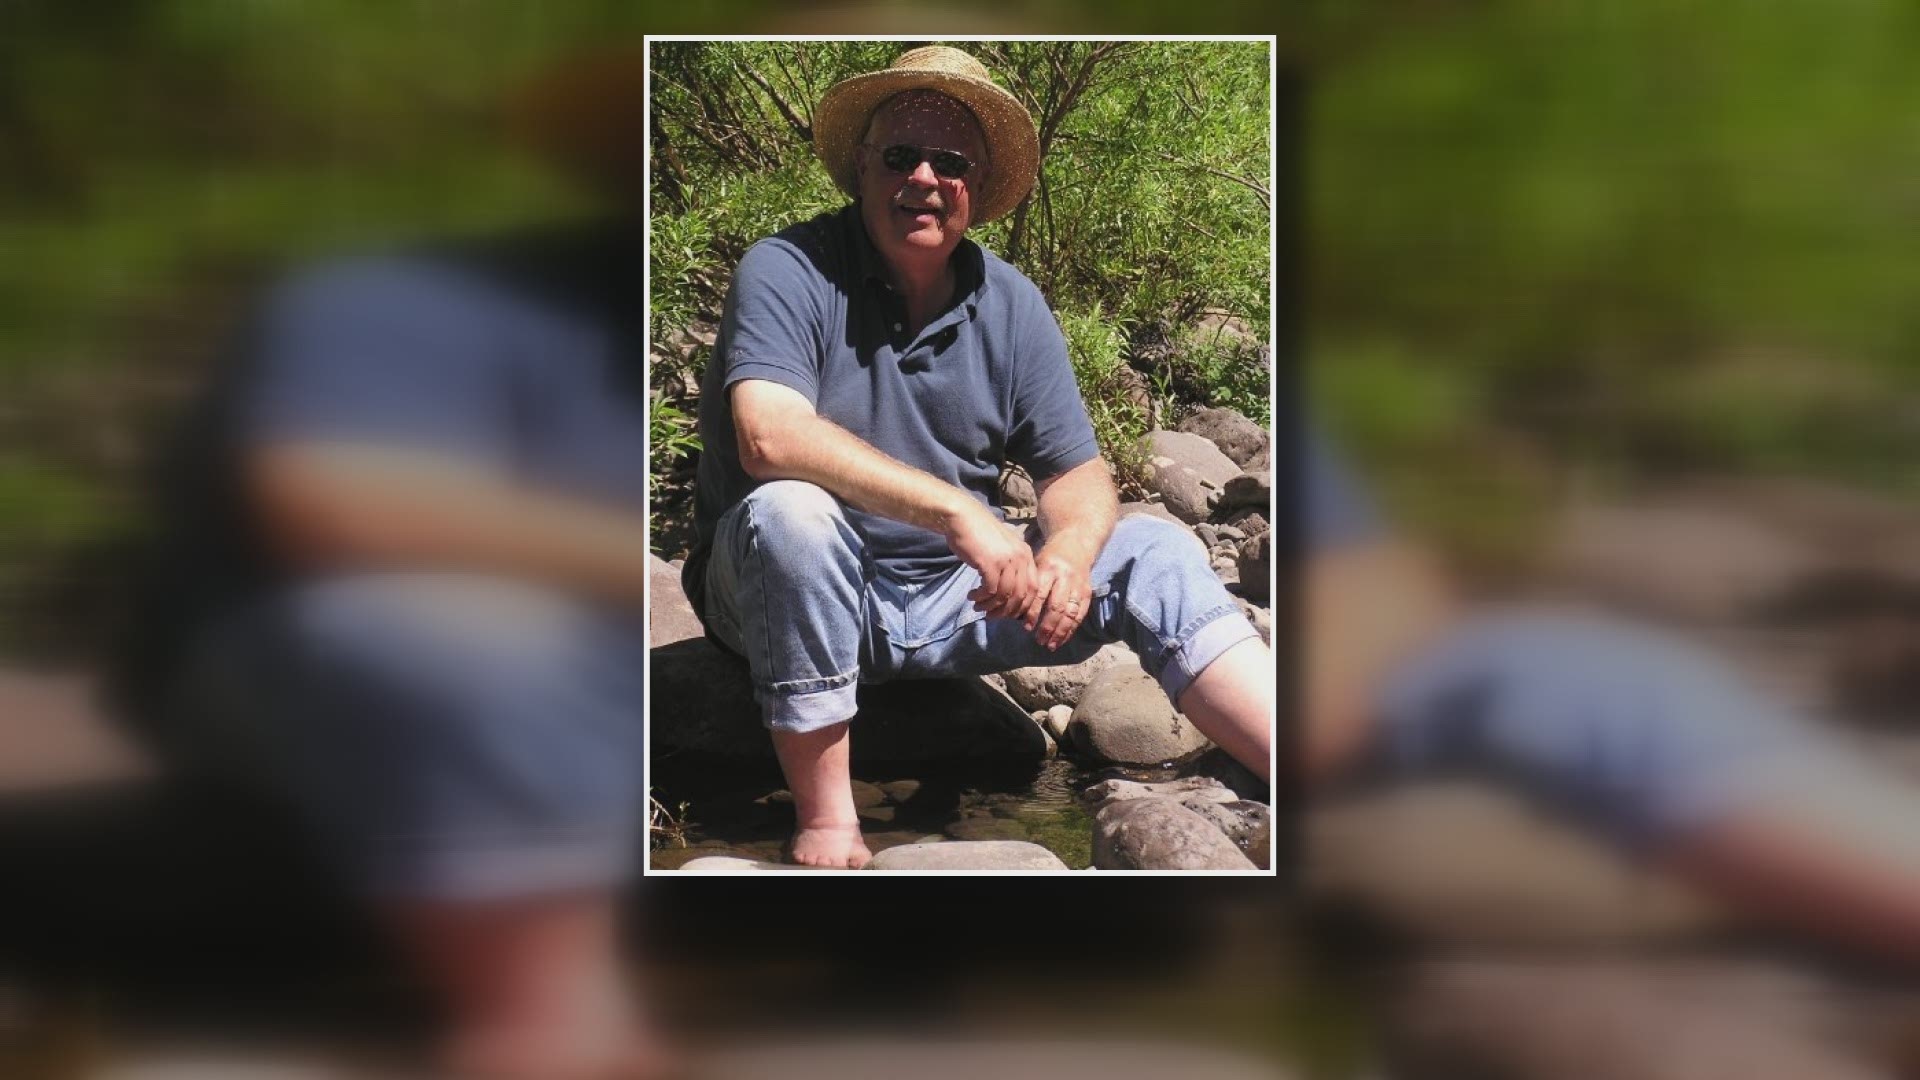 Steve Betschart died from COVID-19 in April. Now his family is sharing their heartbreak and a message for others as coronavirus cases surge ahead of the holidays.